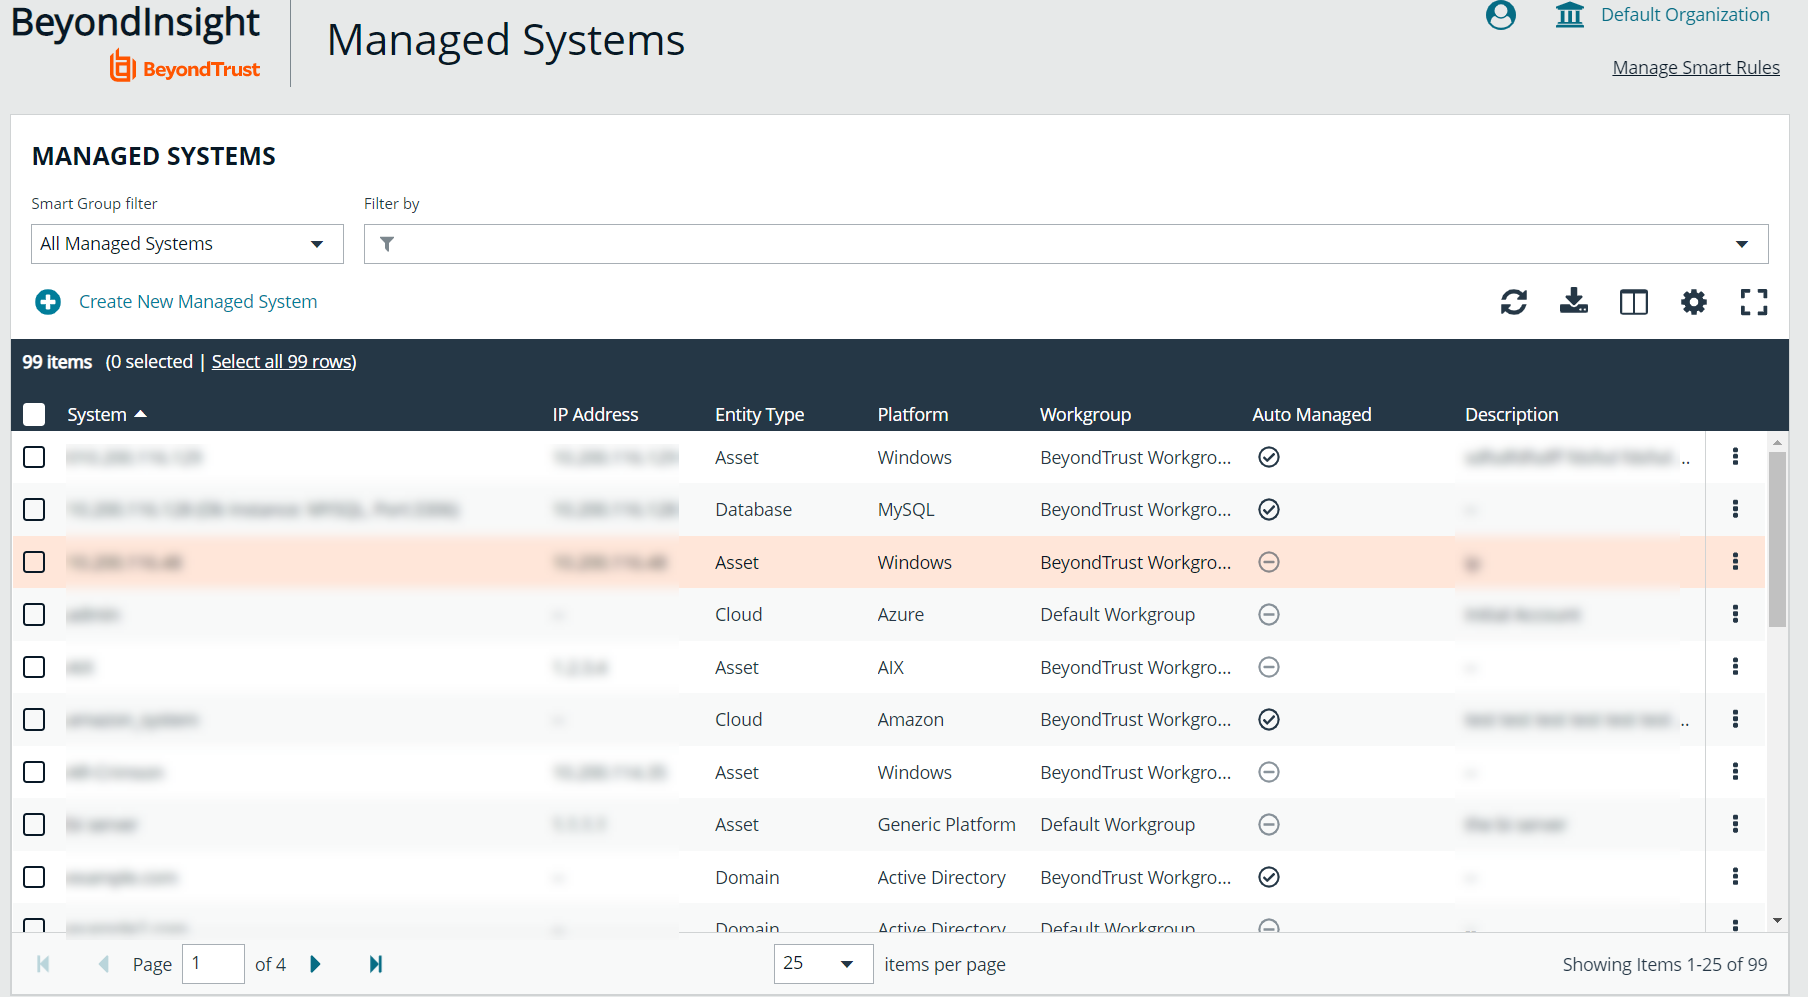 Managed Systems Page in BeyondInsight